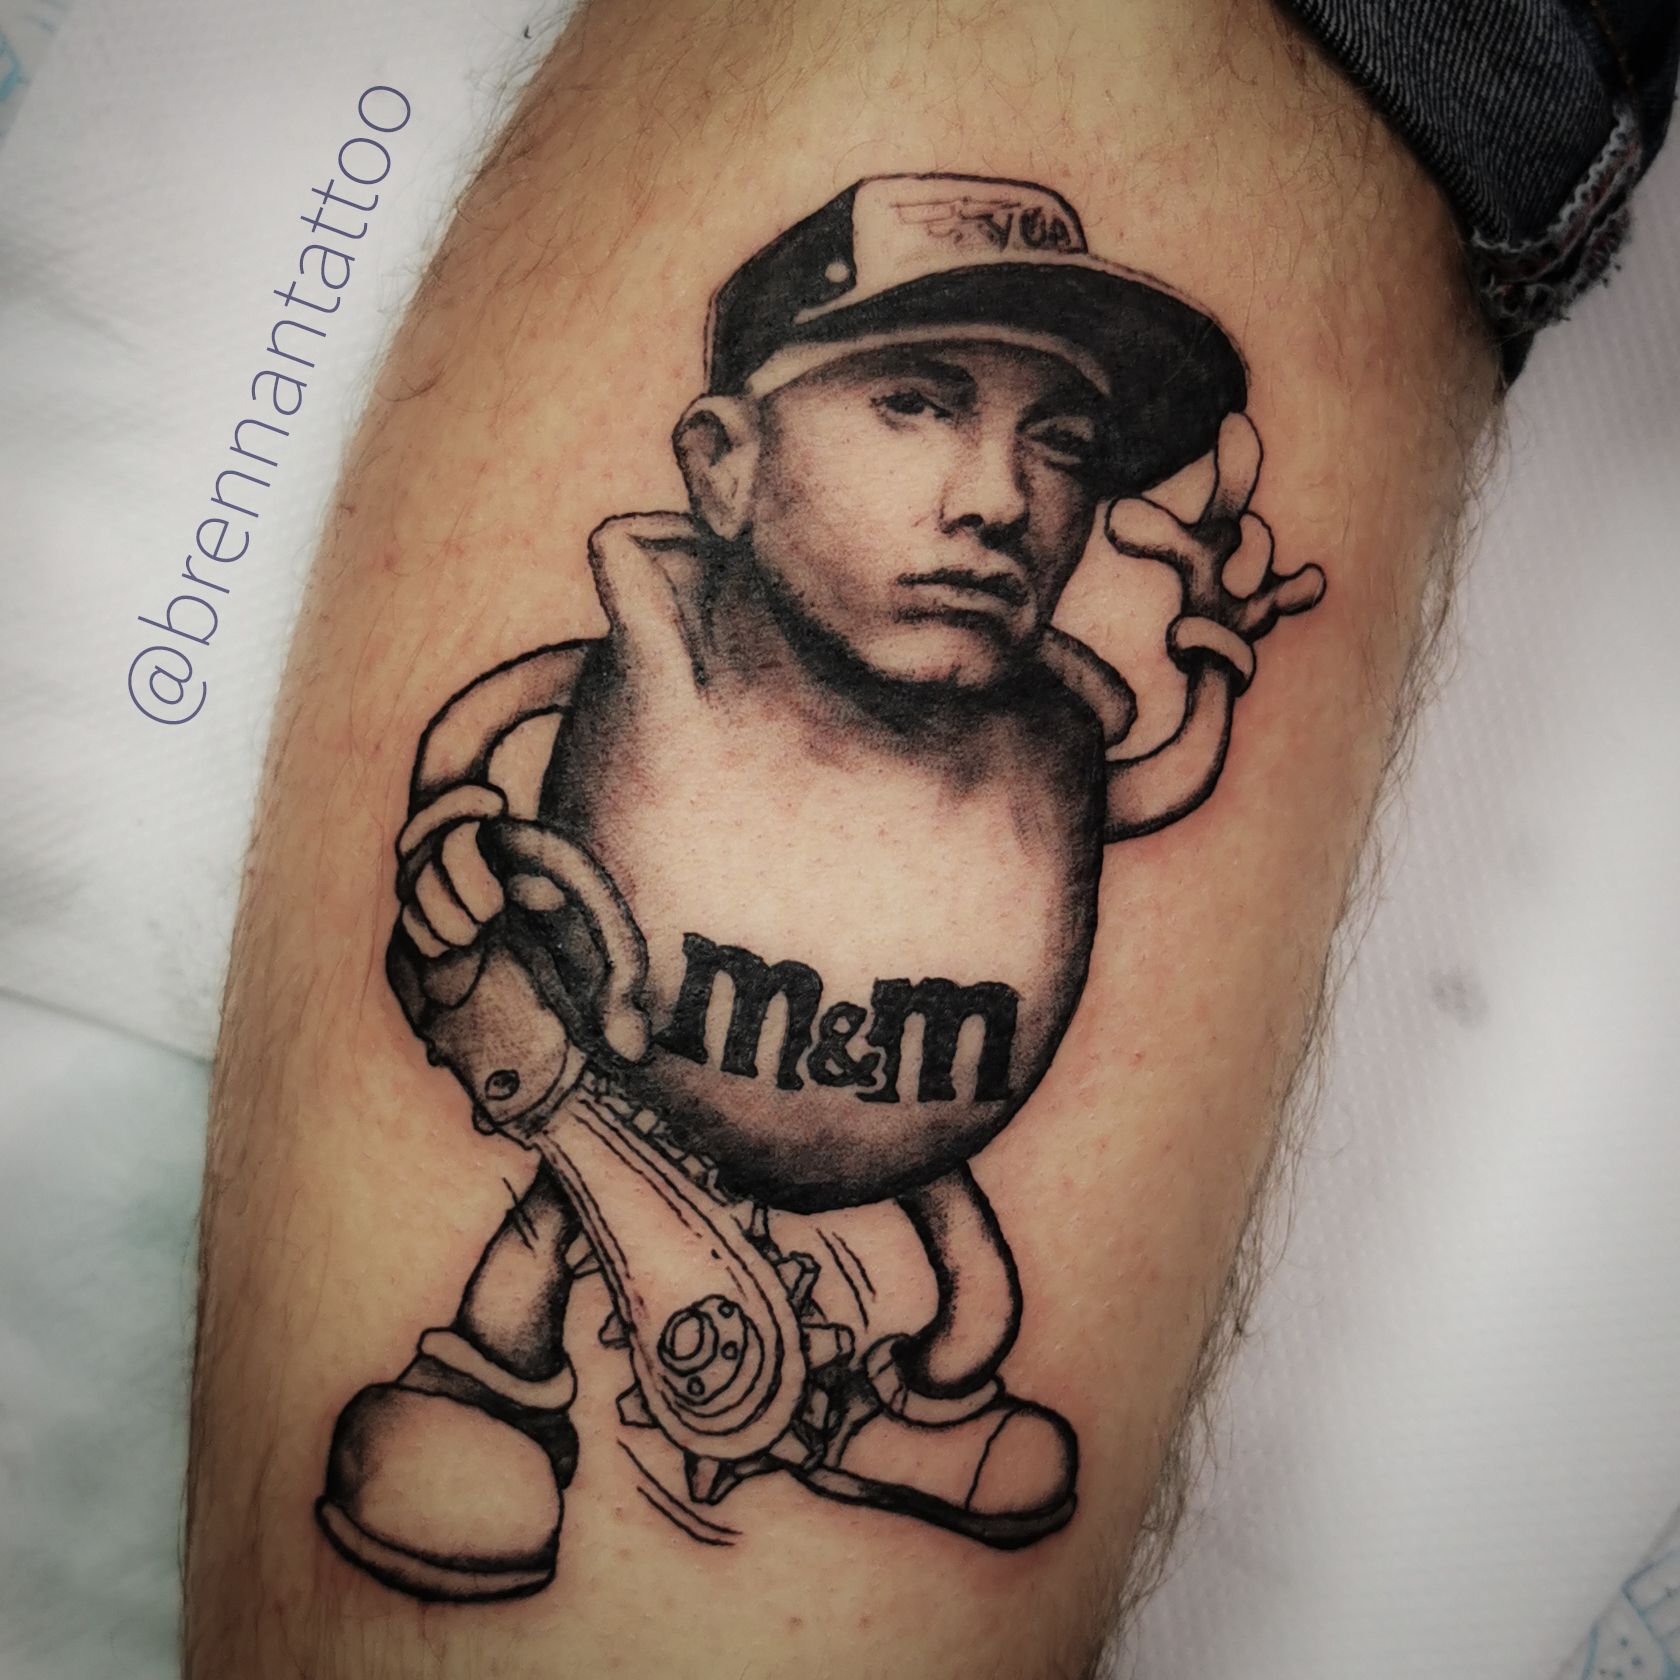 Expressing My Love for Eminem with a Beautiful Tattoo